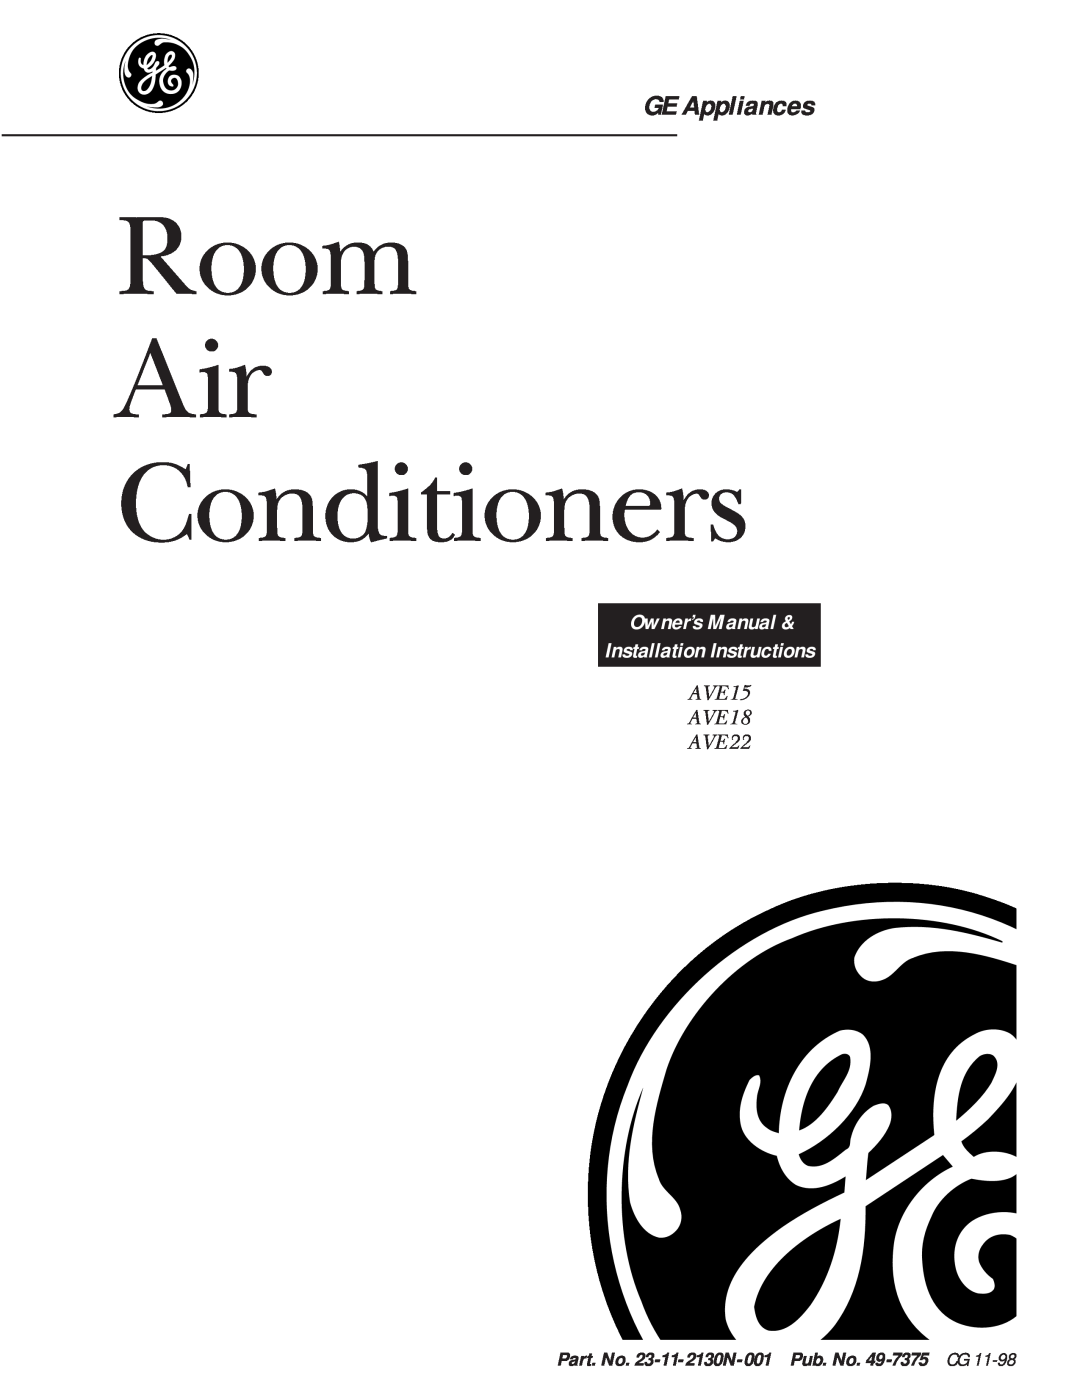 GE owner manual Room Air Conditioners, GE Appliances, AVE15 AVE18 AVE22, Part. No. 23-11-2130N-001Pub. No. 49-7375 CG 